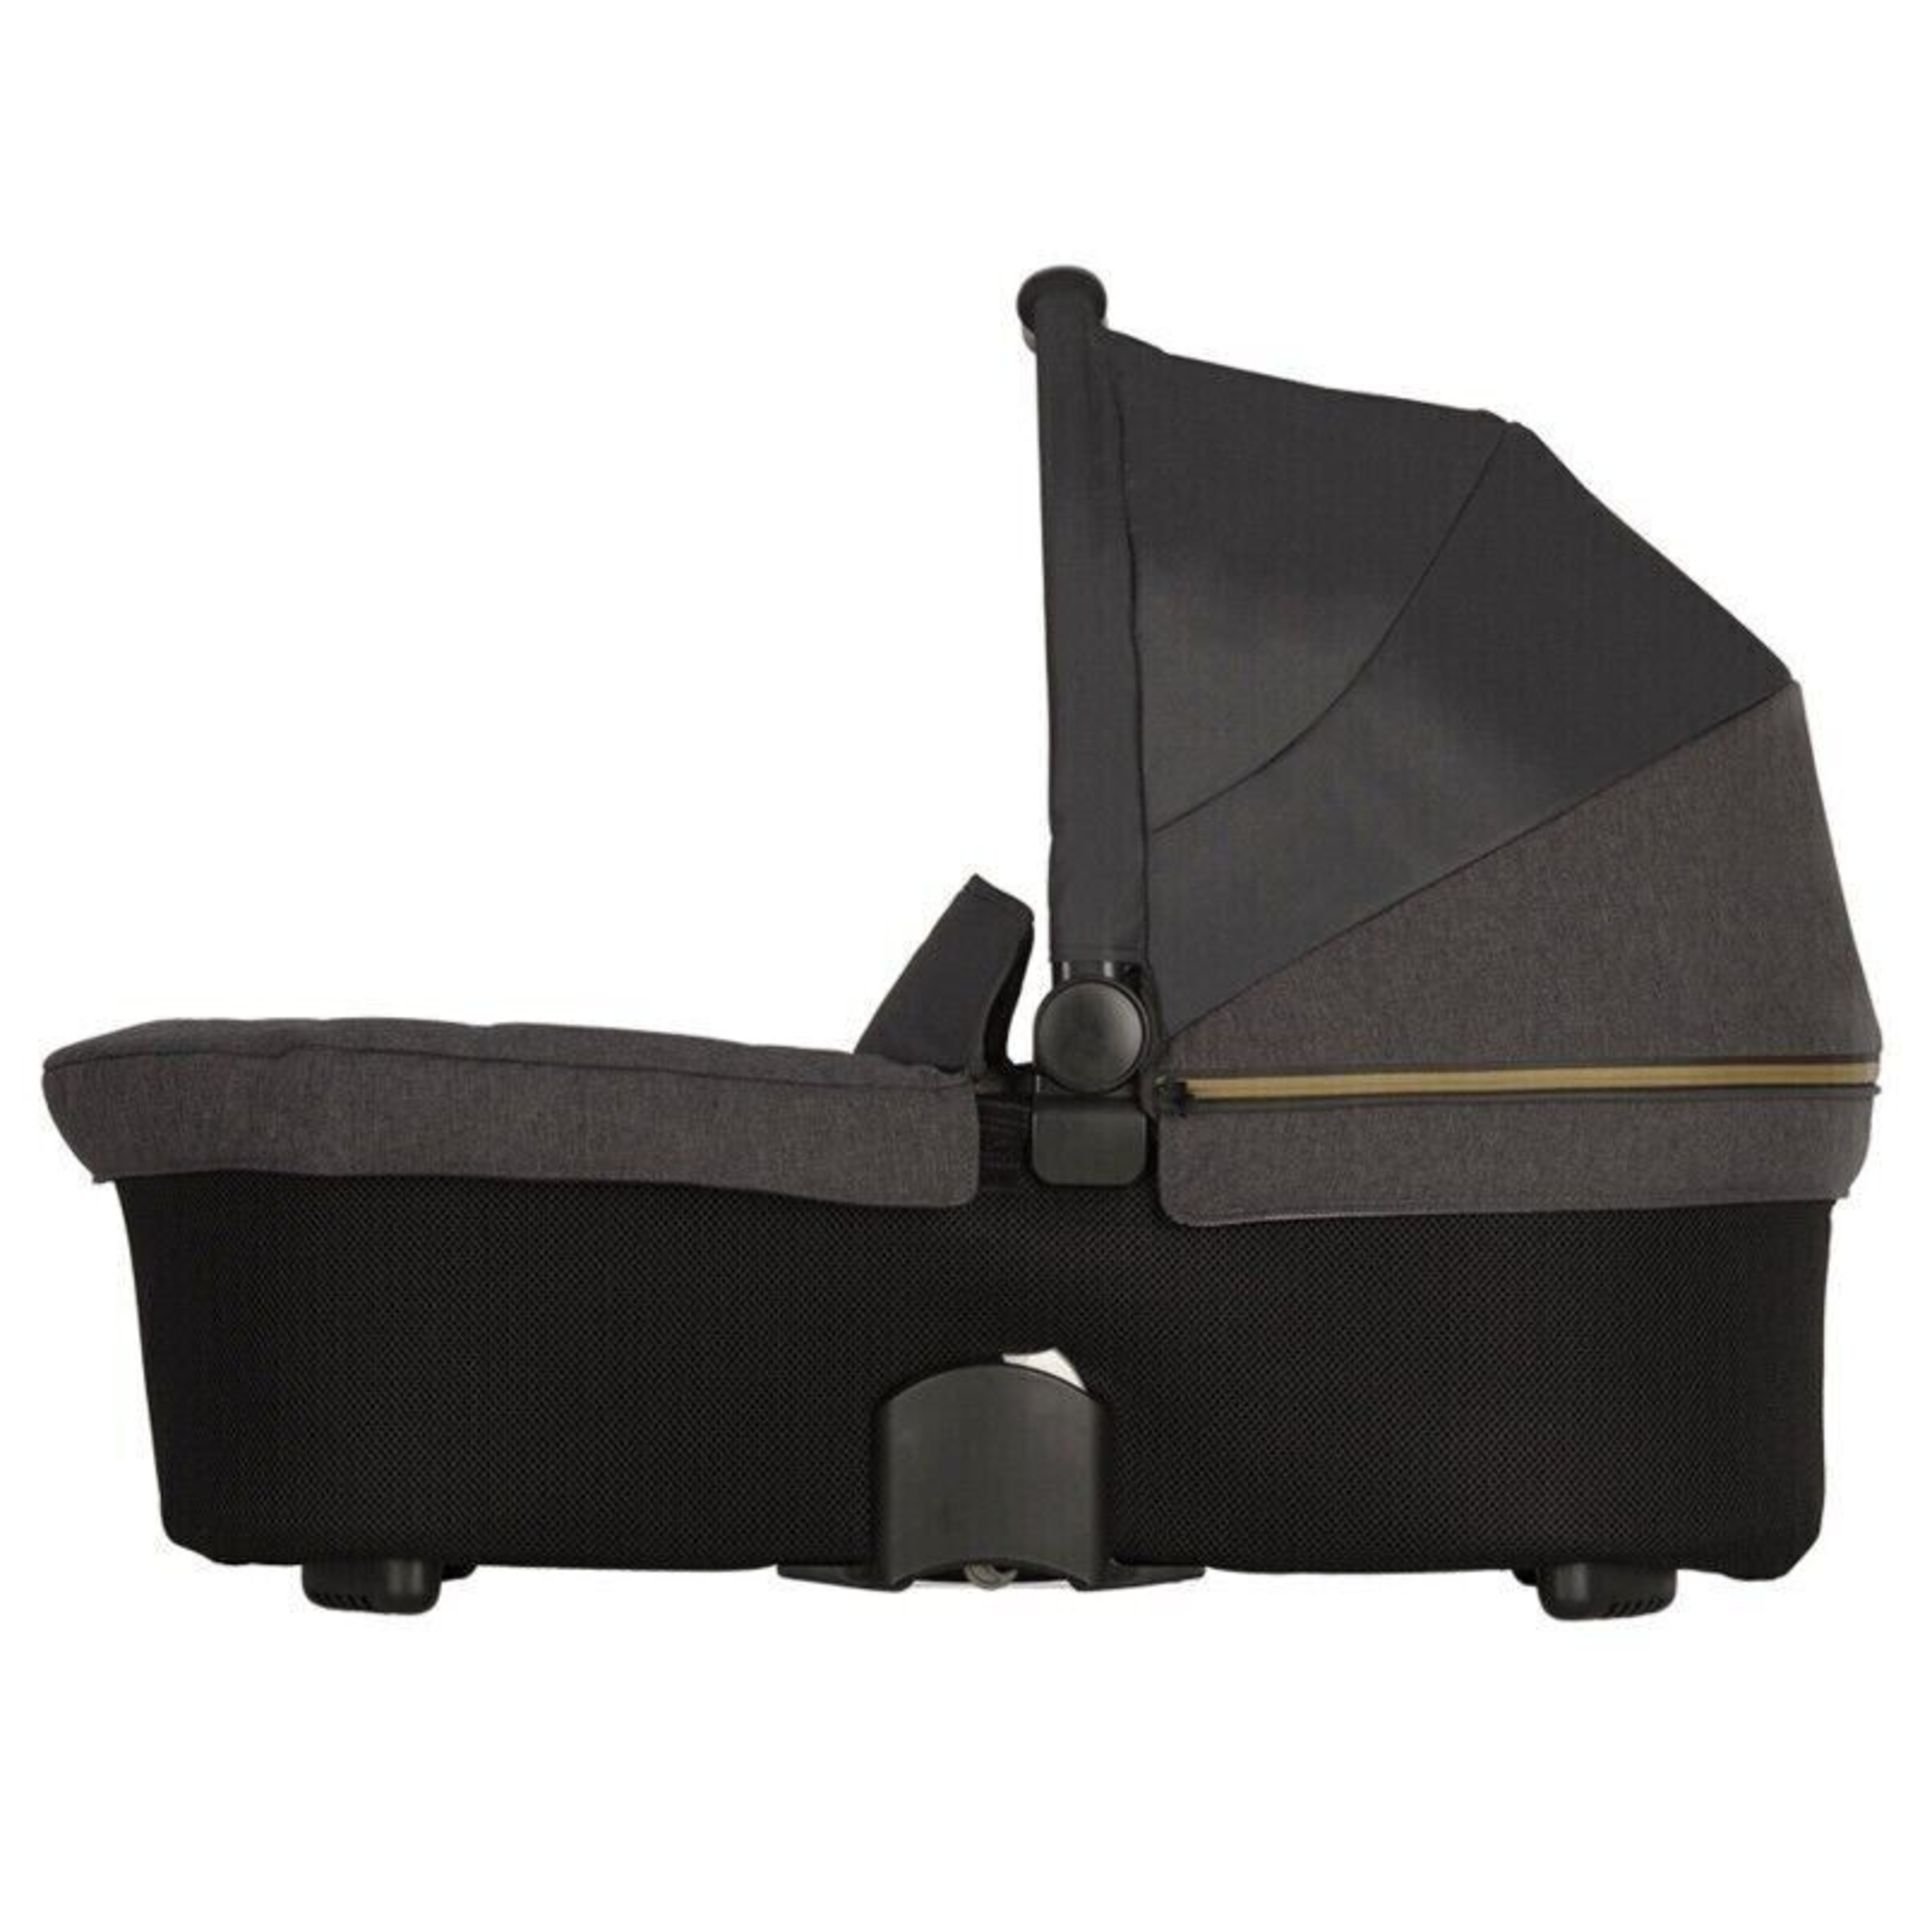 3 x New & Boxed Micralite By Silver Cross Carrycot – Evergreen. RRP £230